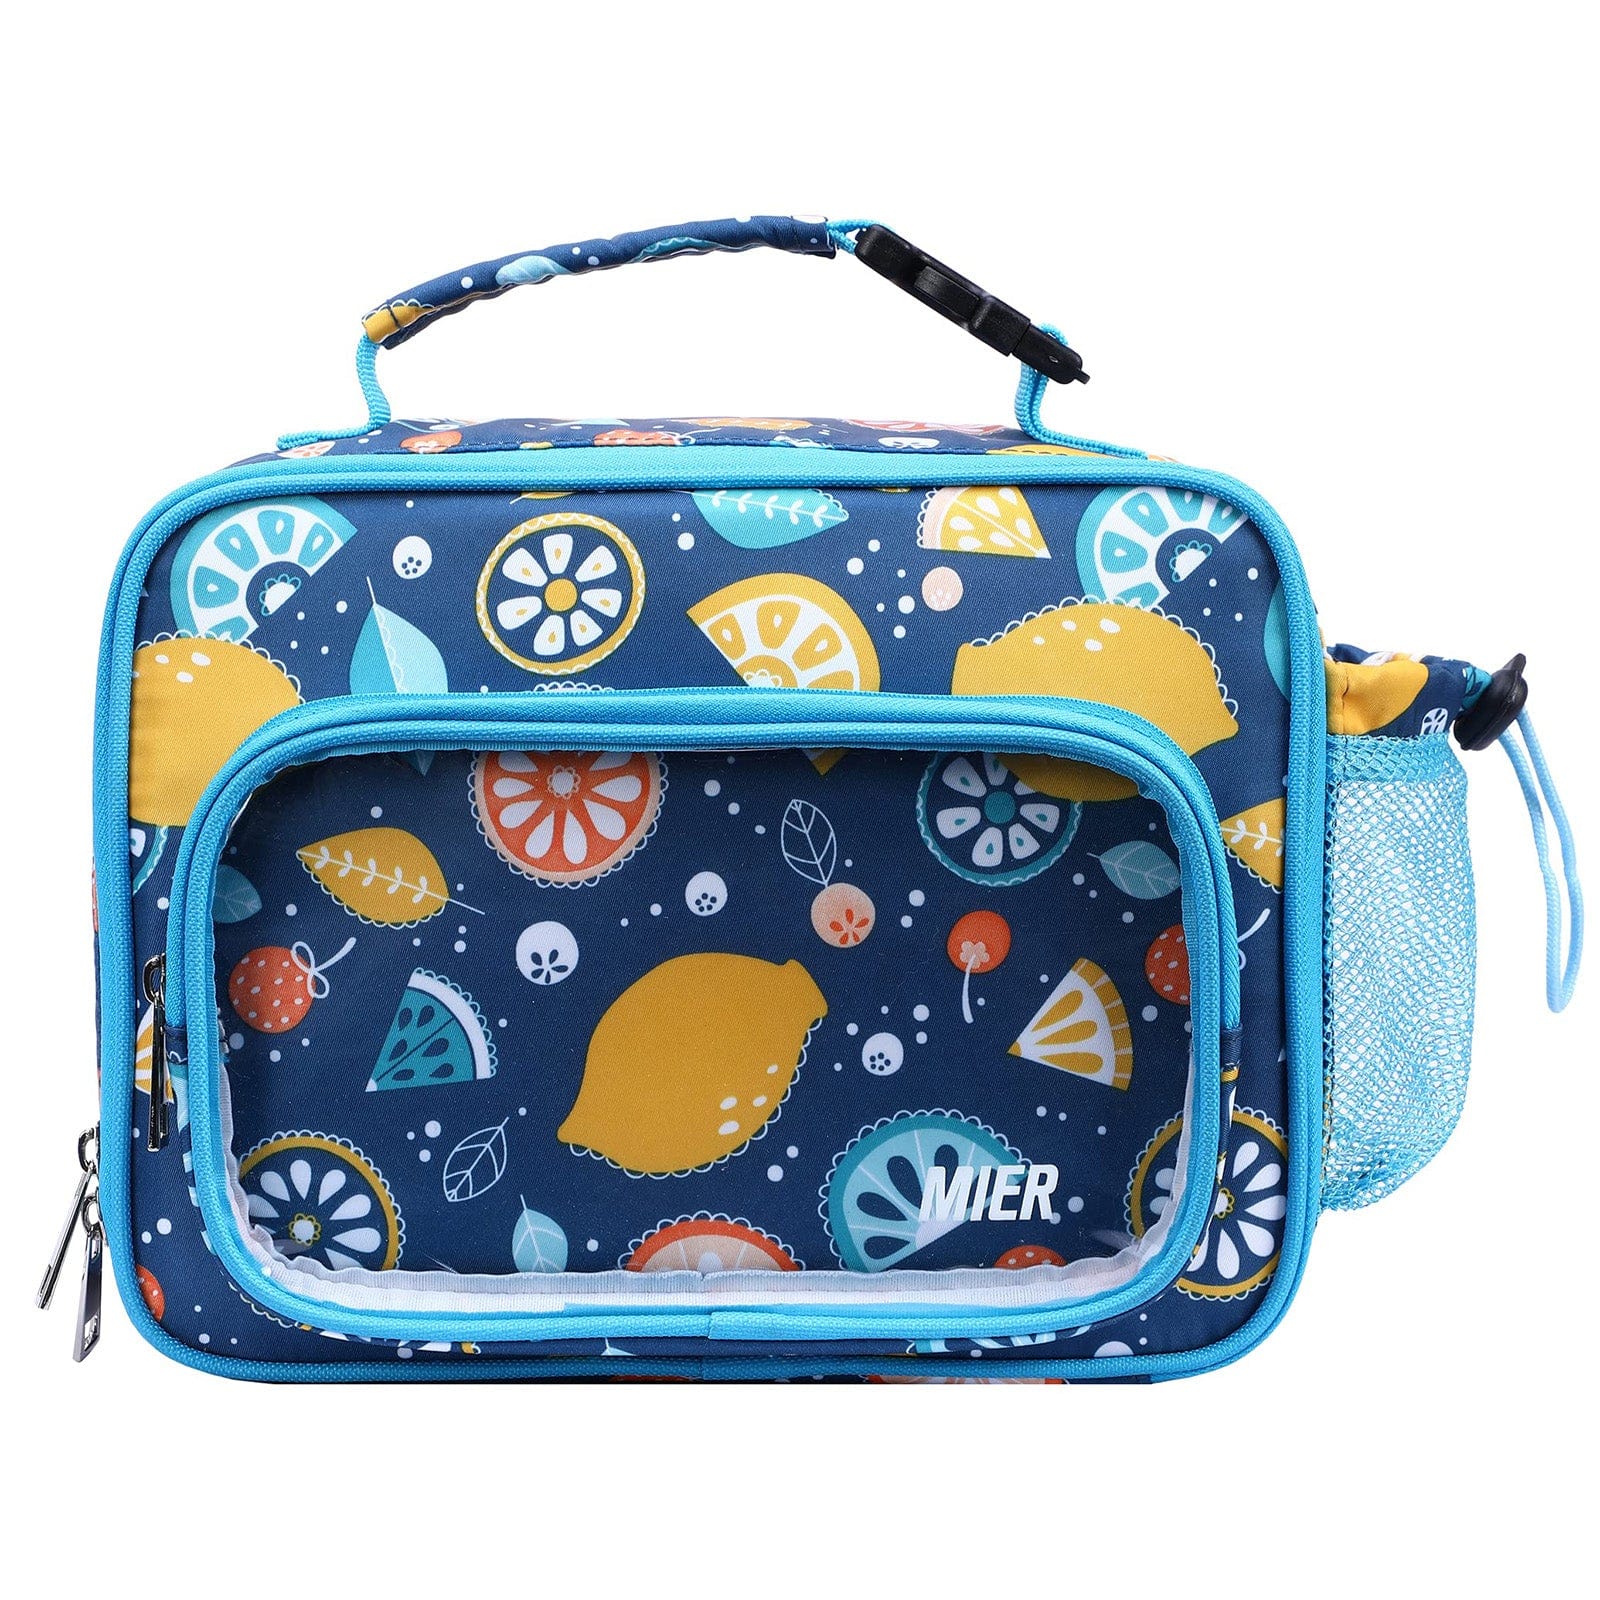 MIER Lunch Bags for Kids Cute Insulated Lunch Box Tote MIER